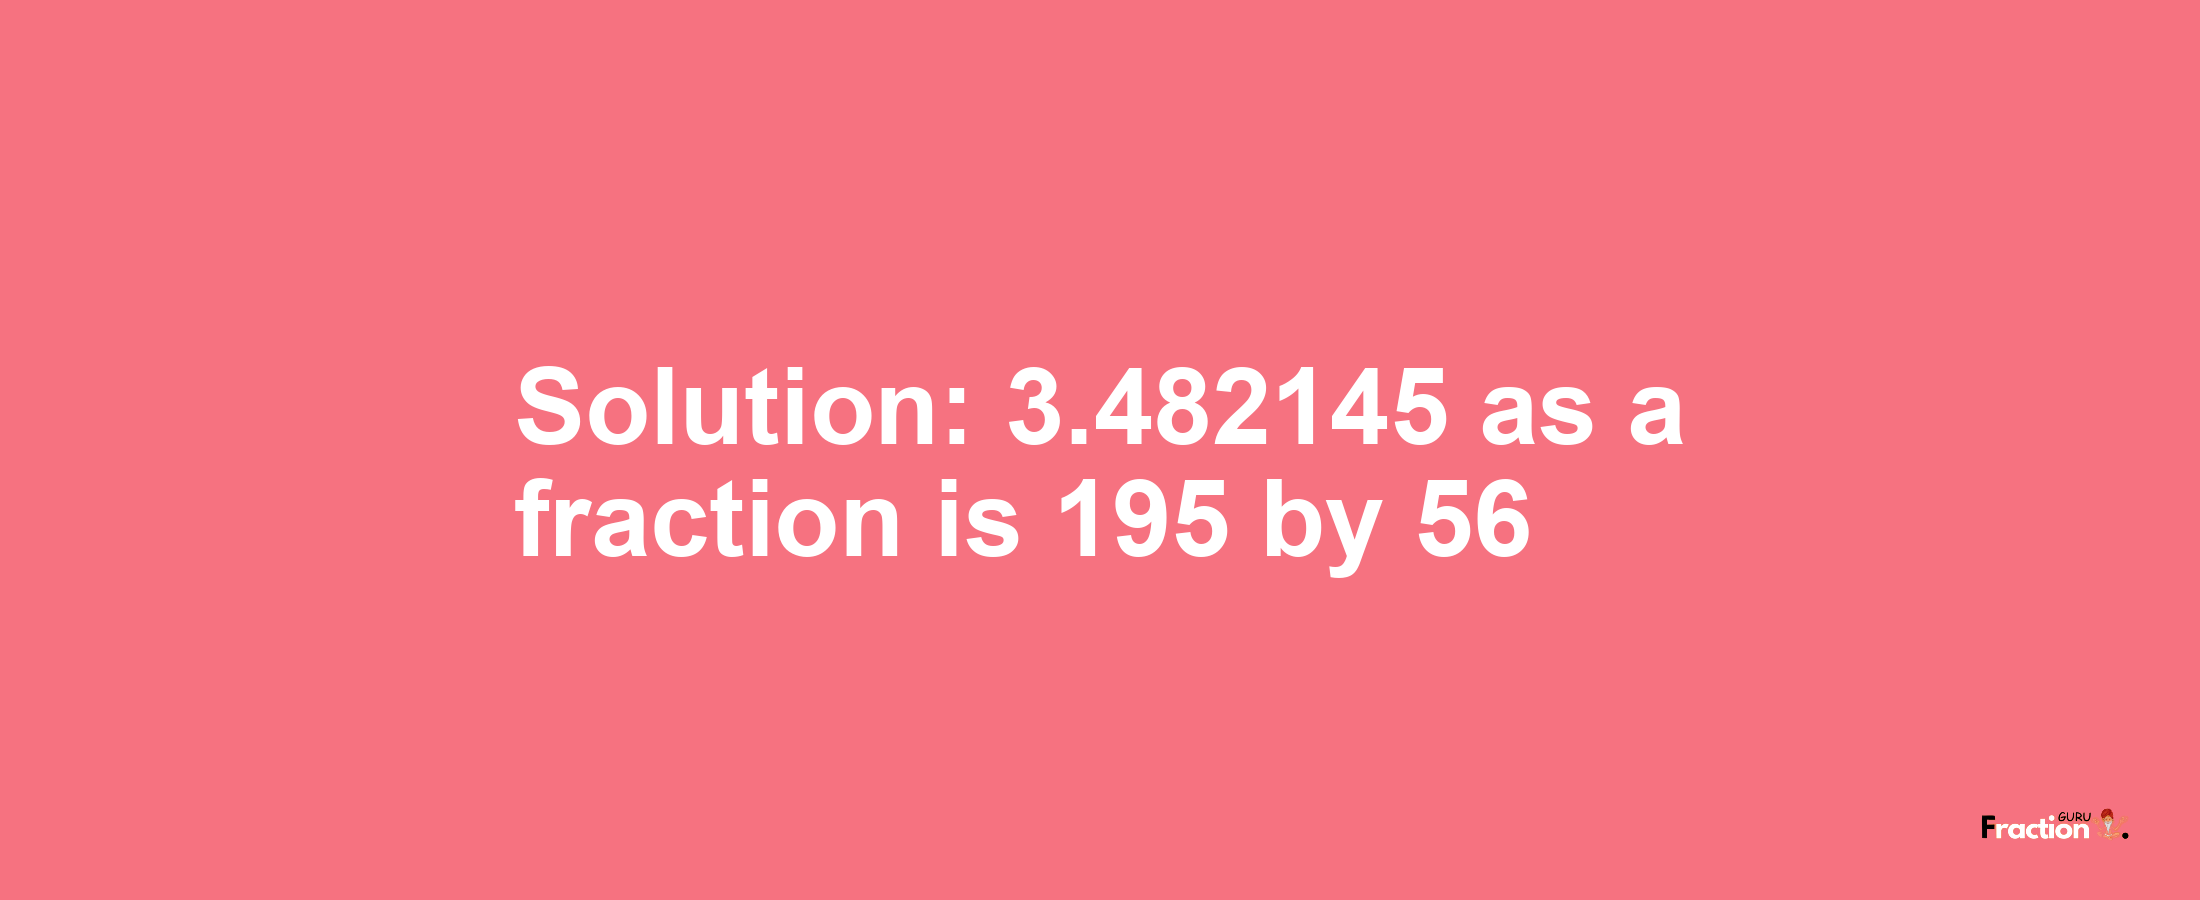 Solution:3.482145 as a fraction is 195/56